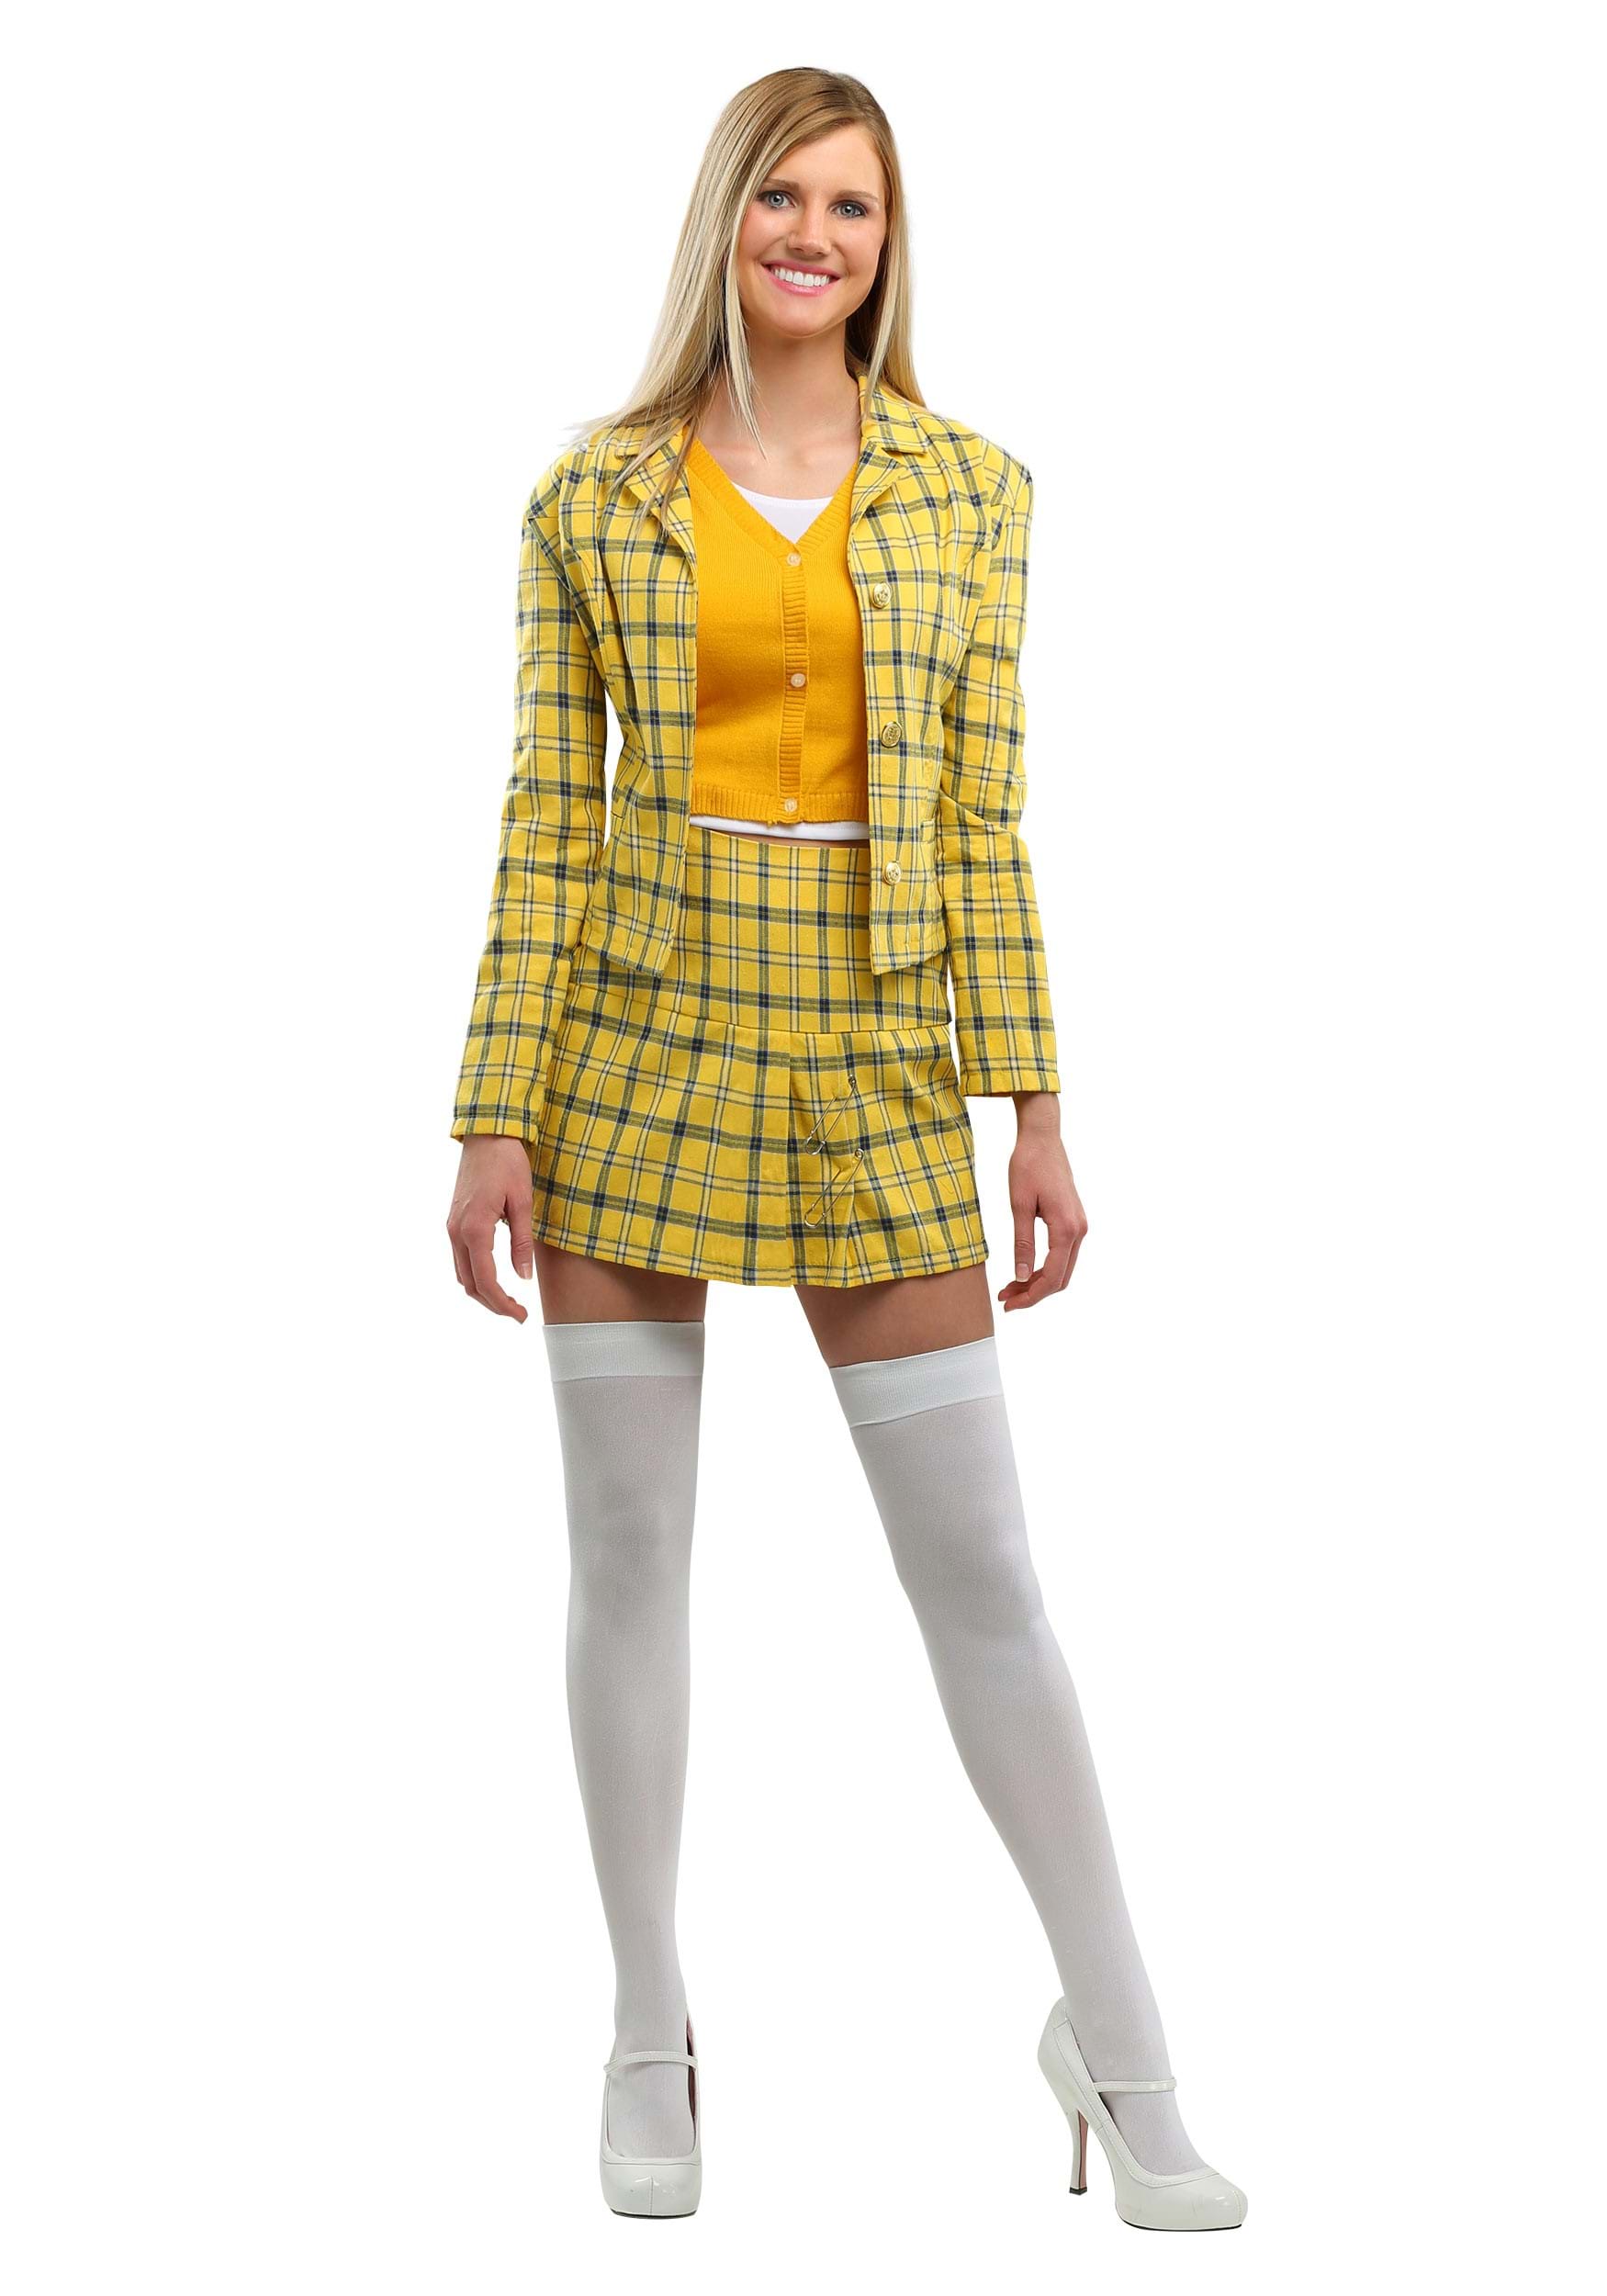 Image of Clueless Cher Plus Size Costume for Women | 90s Movie Costume ID FUN2948PL-2X